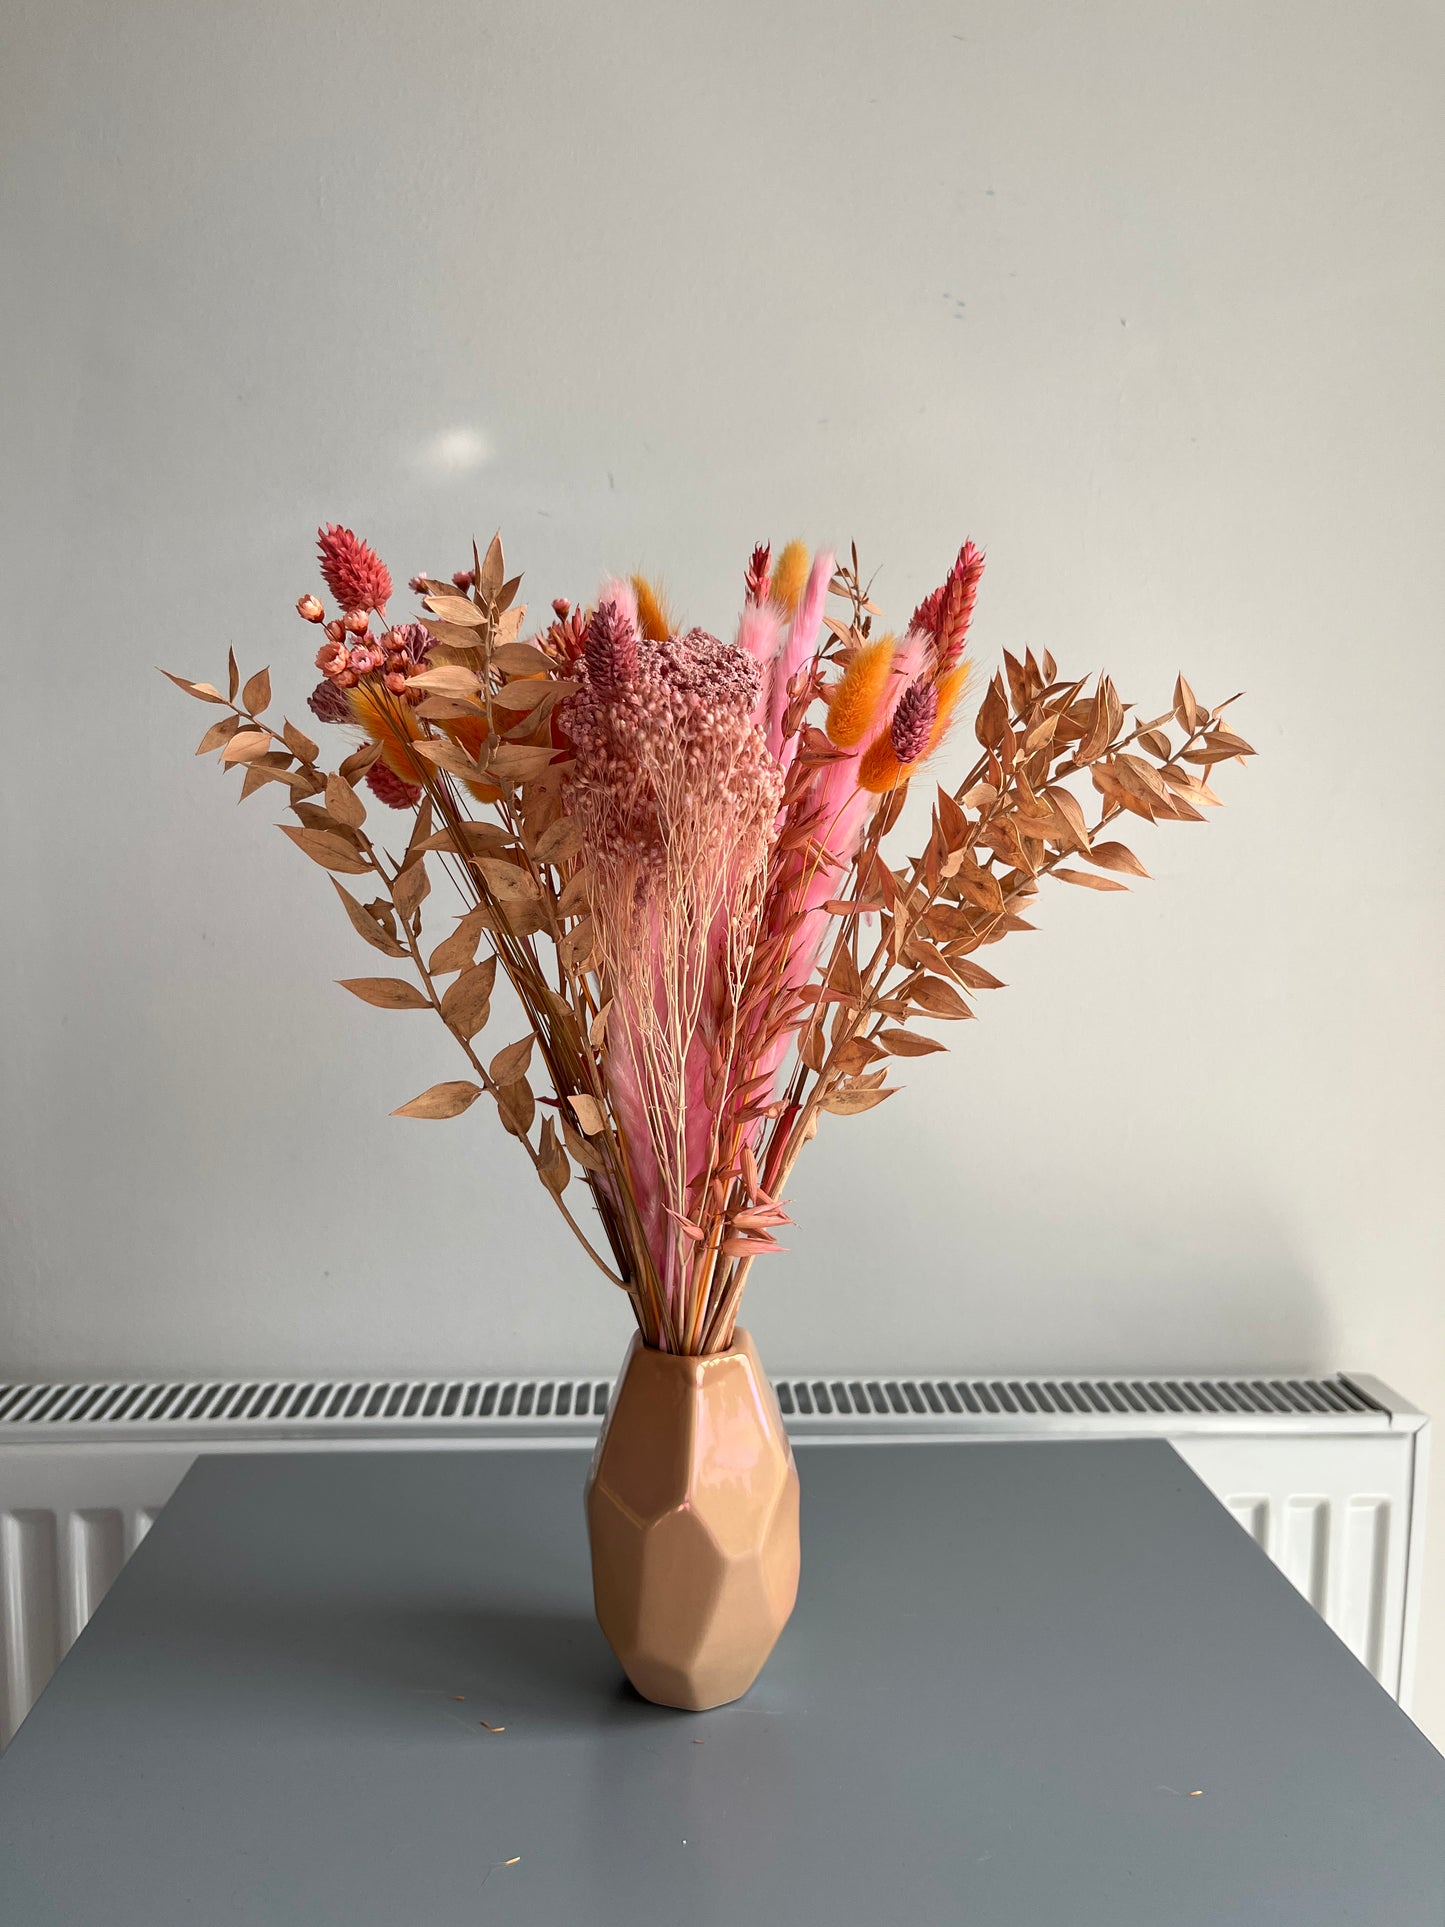 30-35cm Length Bespoke Dried Flowers Created For You